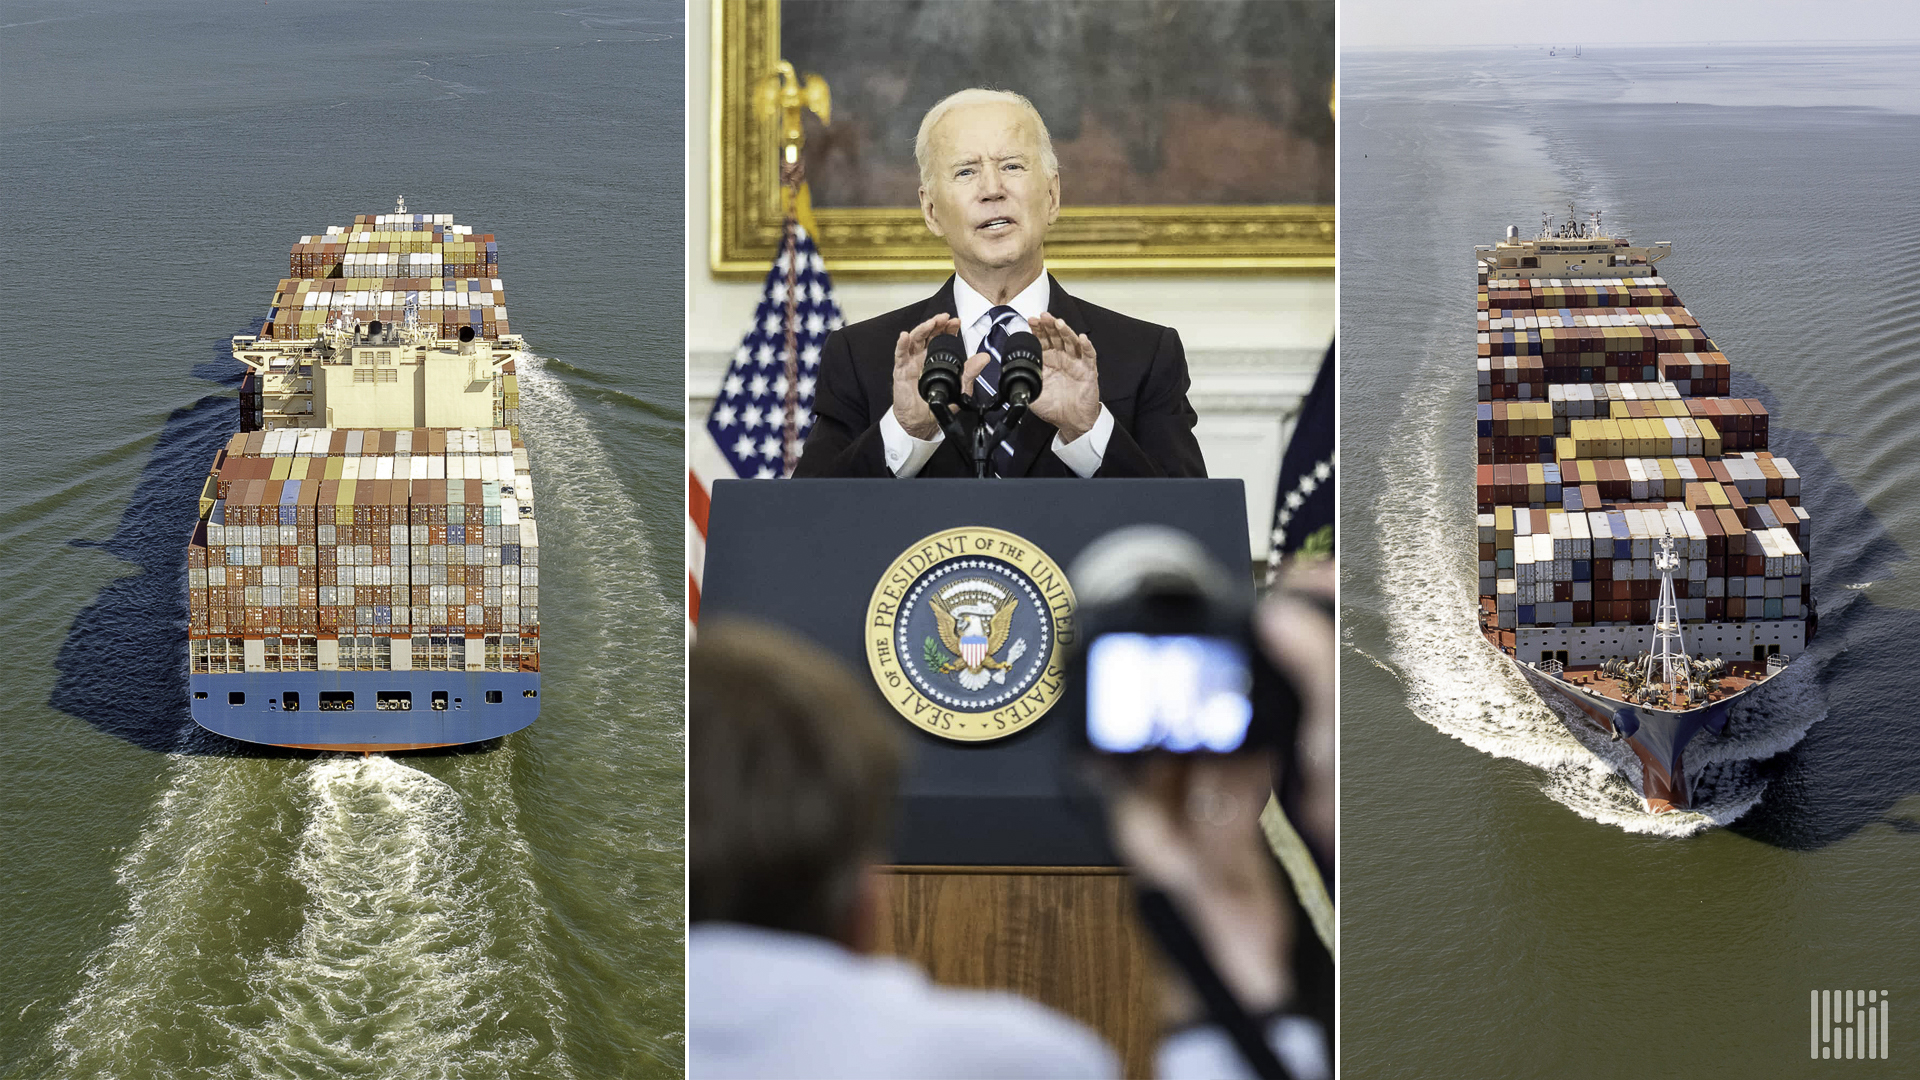 Biden speaking at White House and flanked by photos of container ships